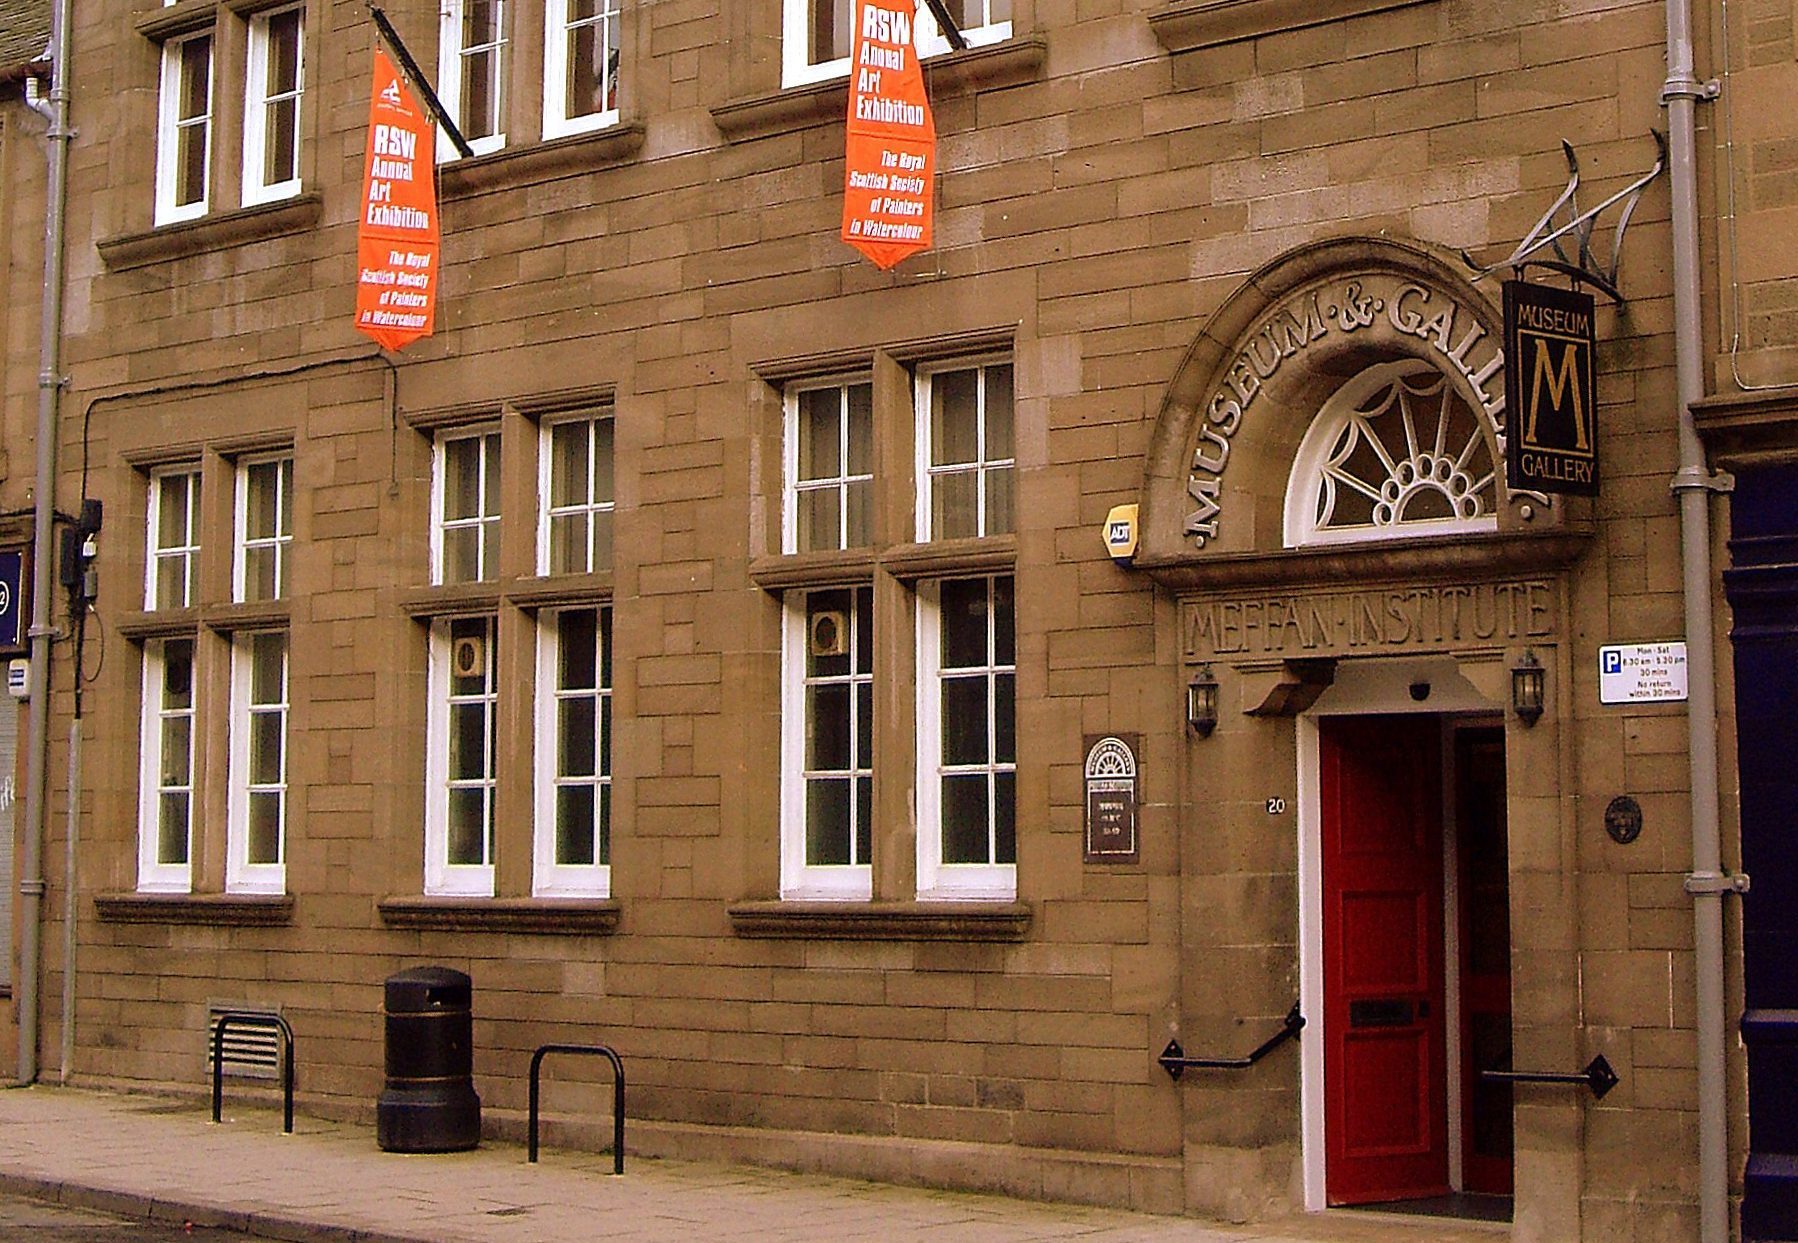 The union has warned that arts cuts will impact on envied cultural assets like the Meffan in Forfar.